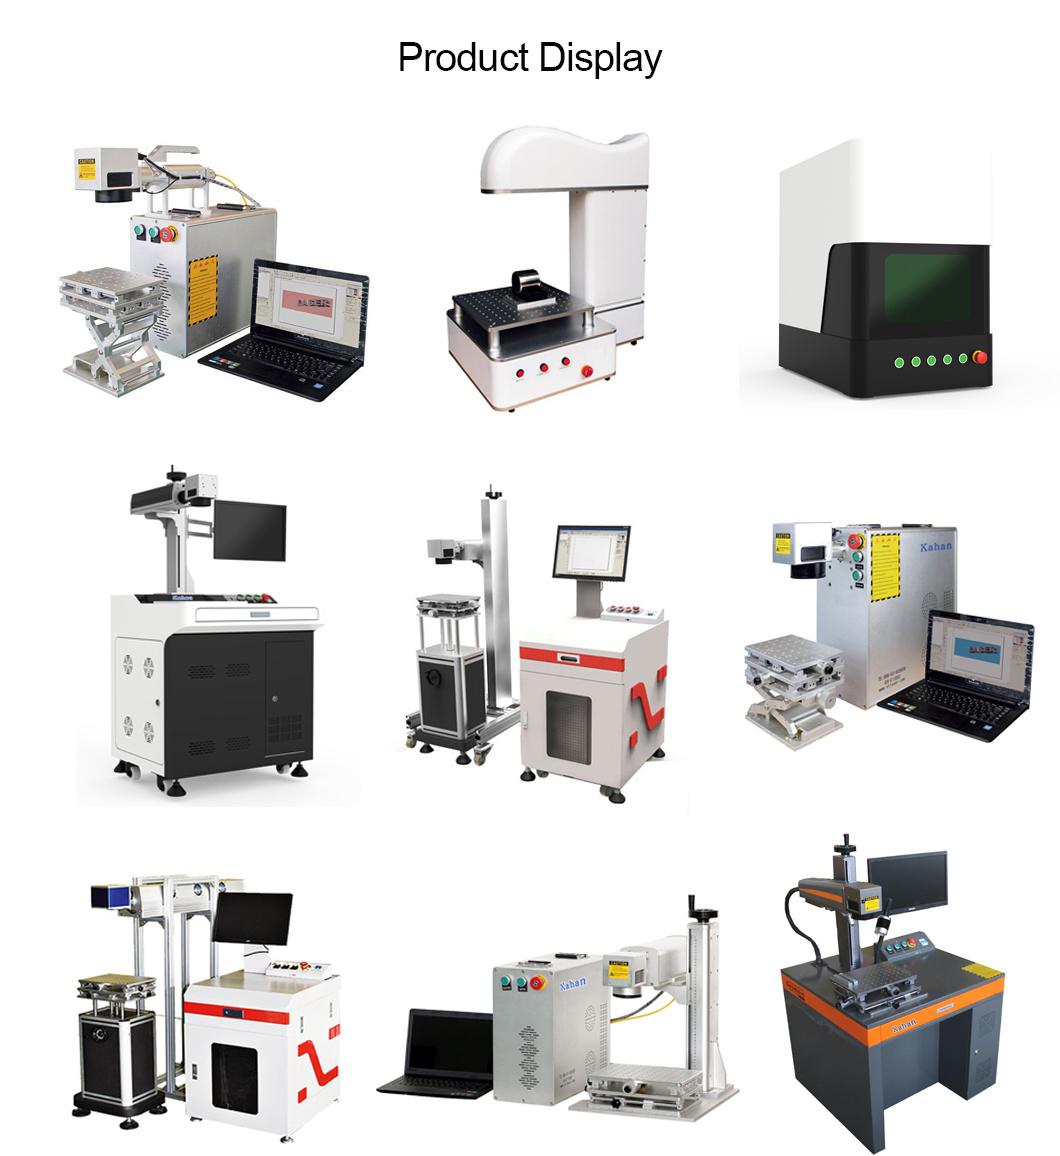 Portable 20W/30W/50W CNC Fiber Laser Marking Marker Equipment Machine for Metal/ Plastic Cup/ Phonecase /Bearing/PVC